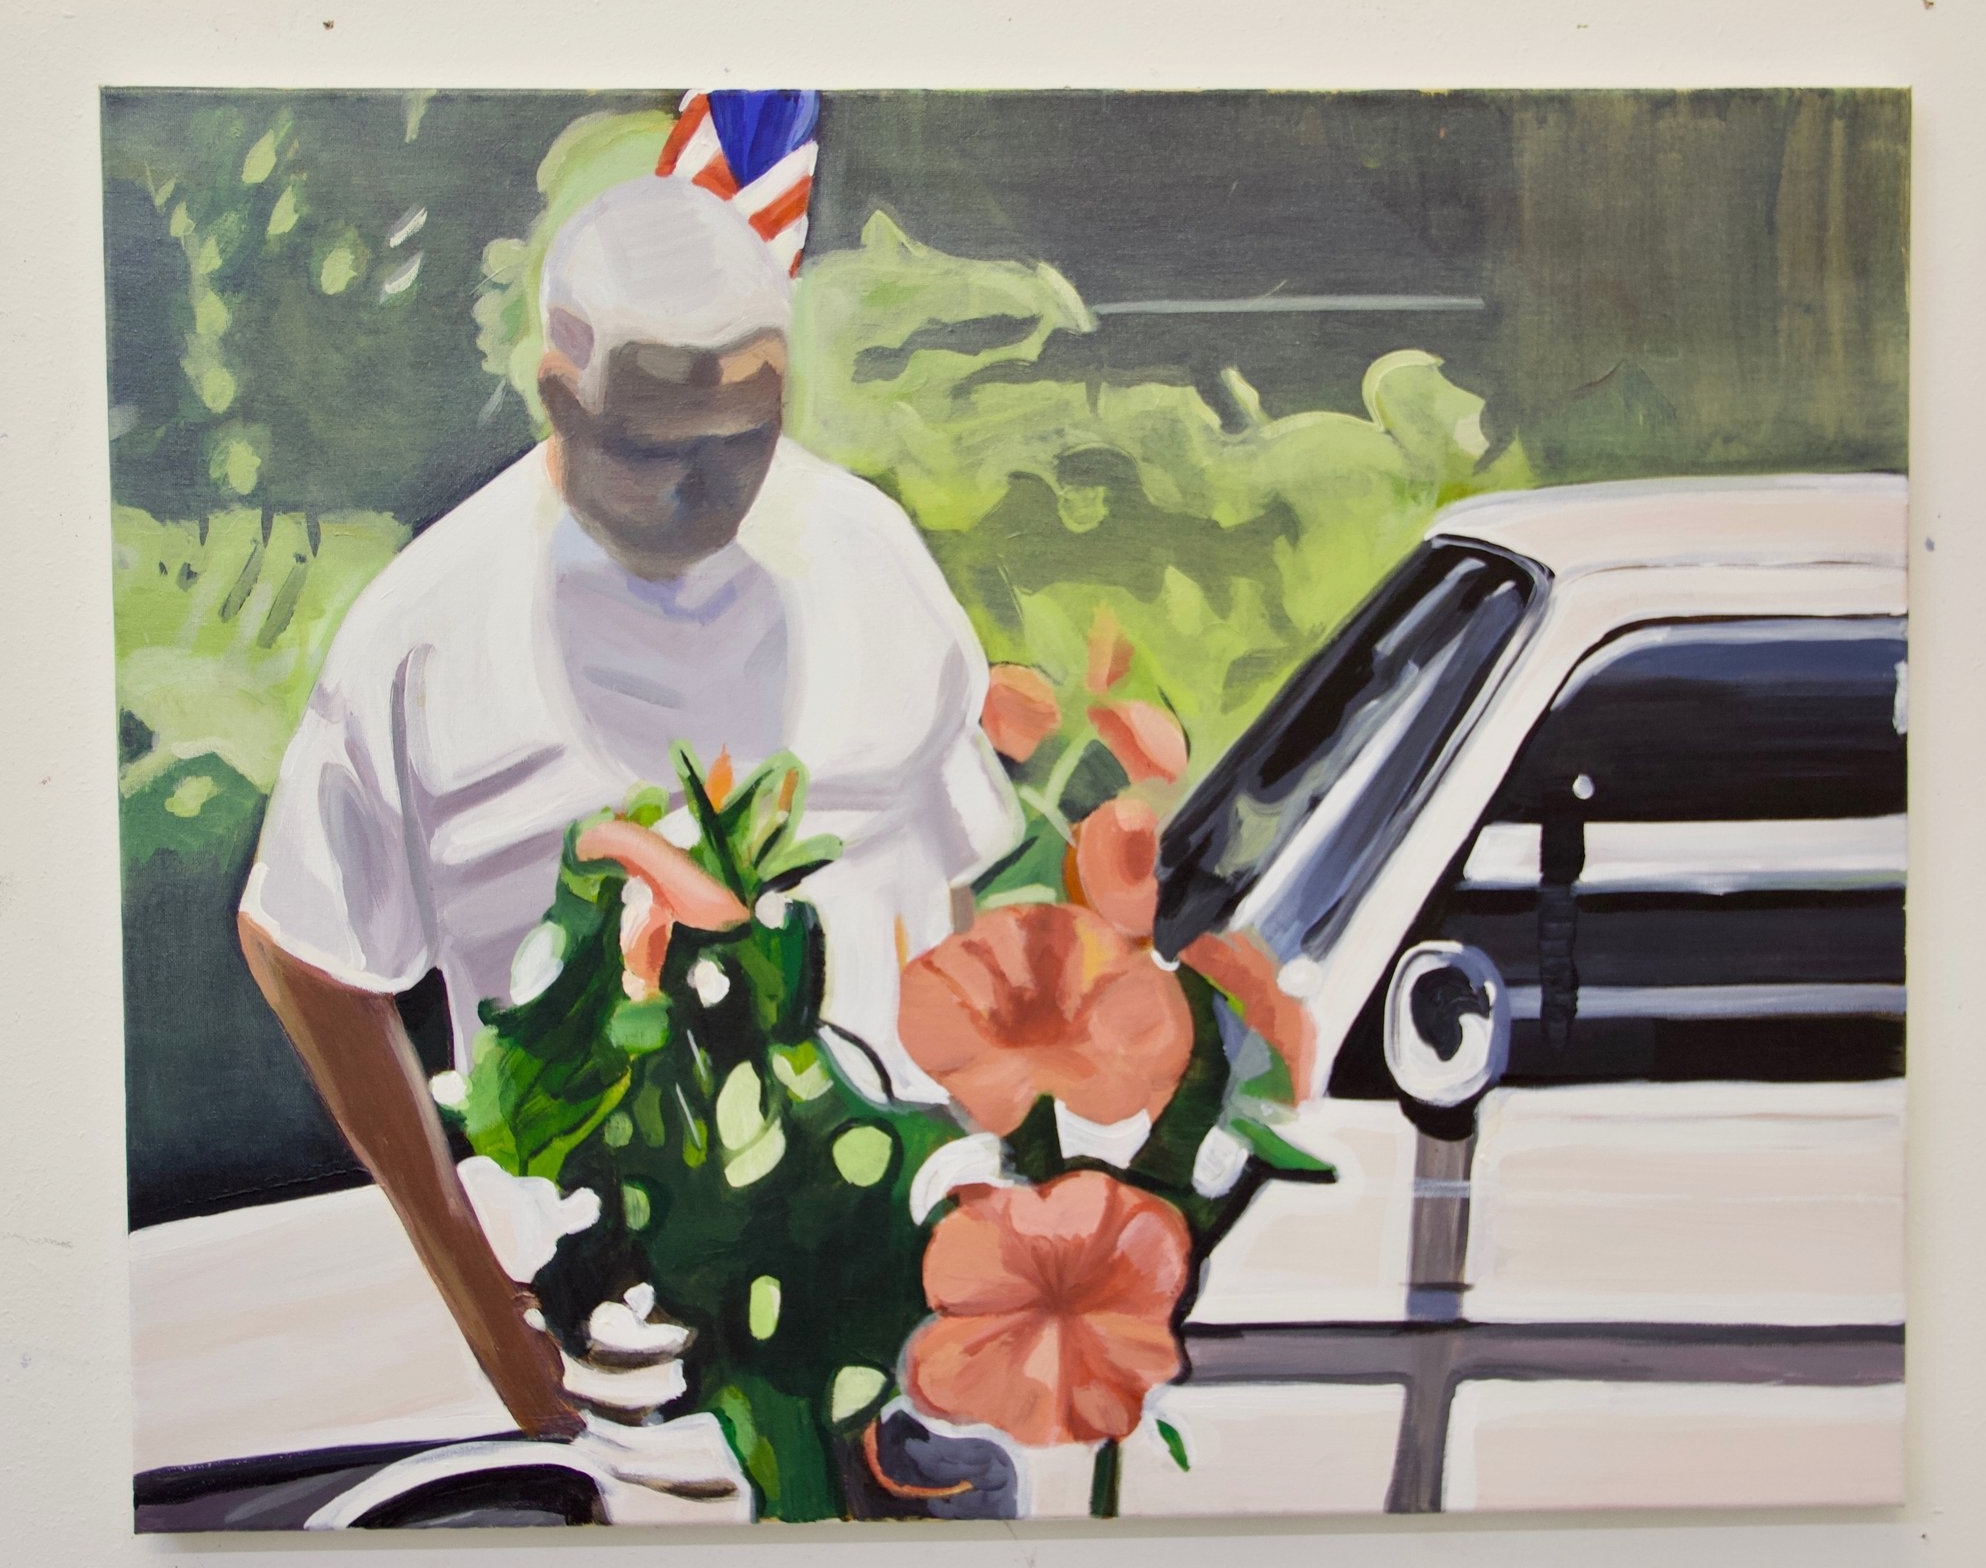   Cadillac , 2017 Oil and acrylic on canvas 24 x 30 inches 61 x 76 cm 